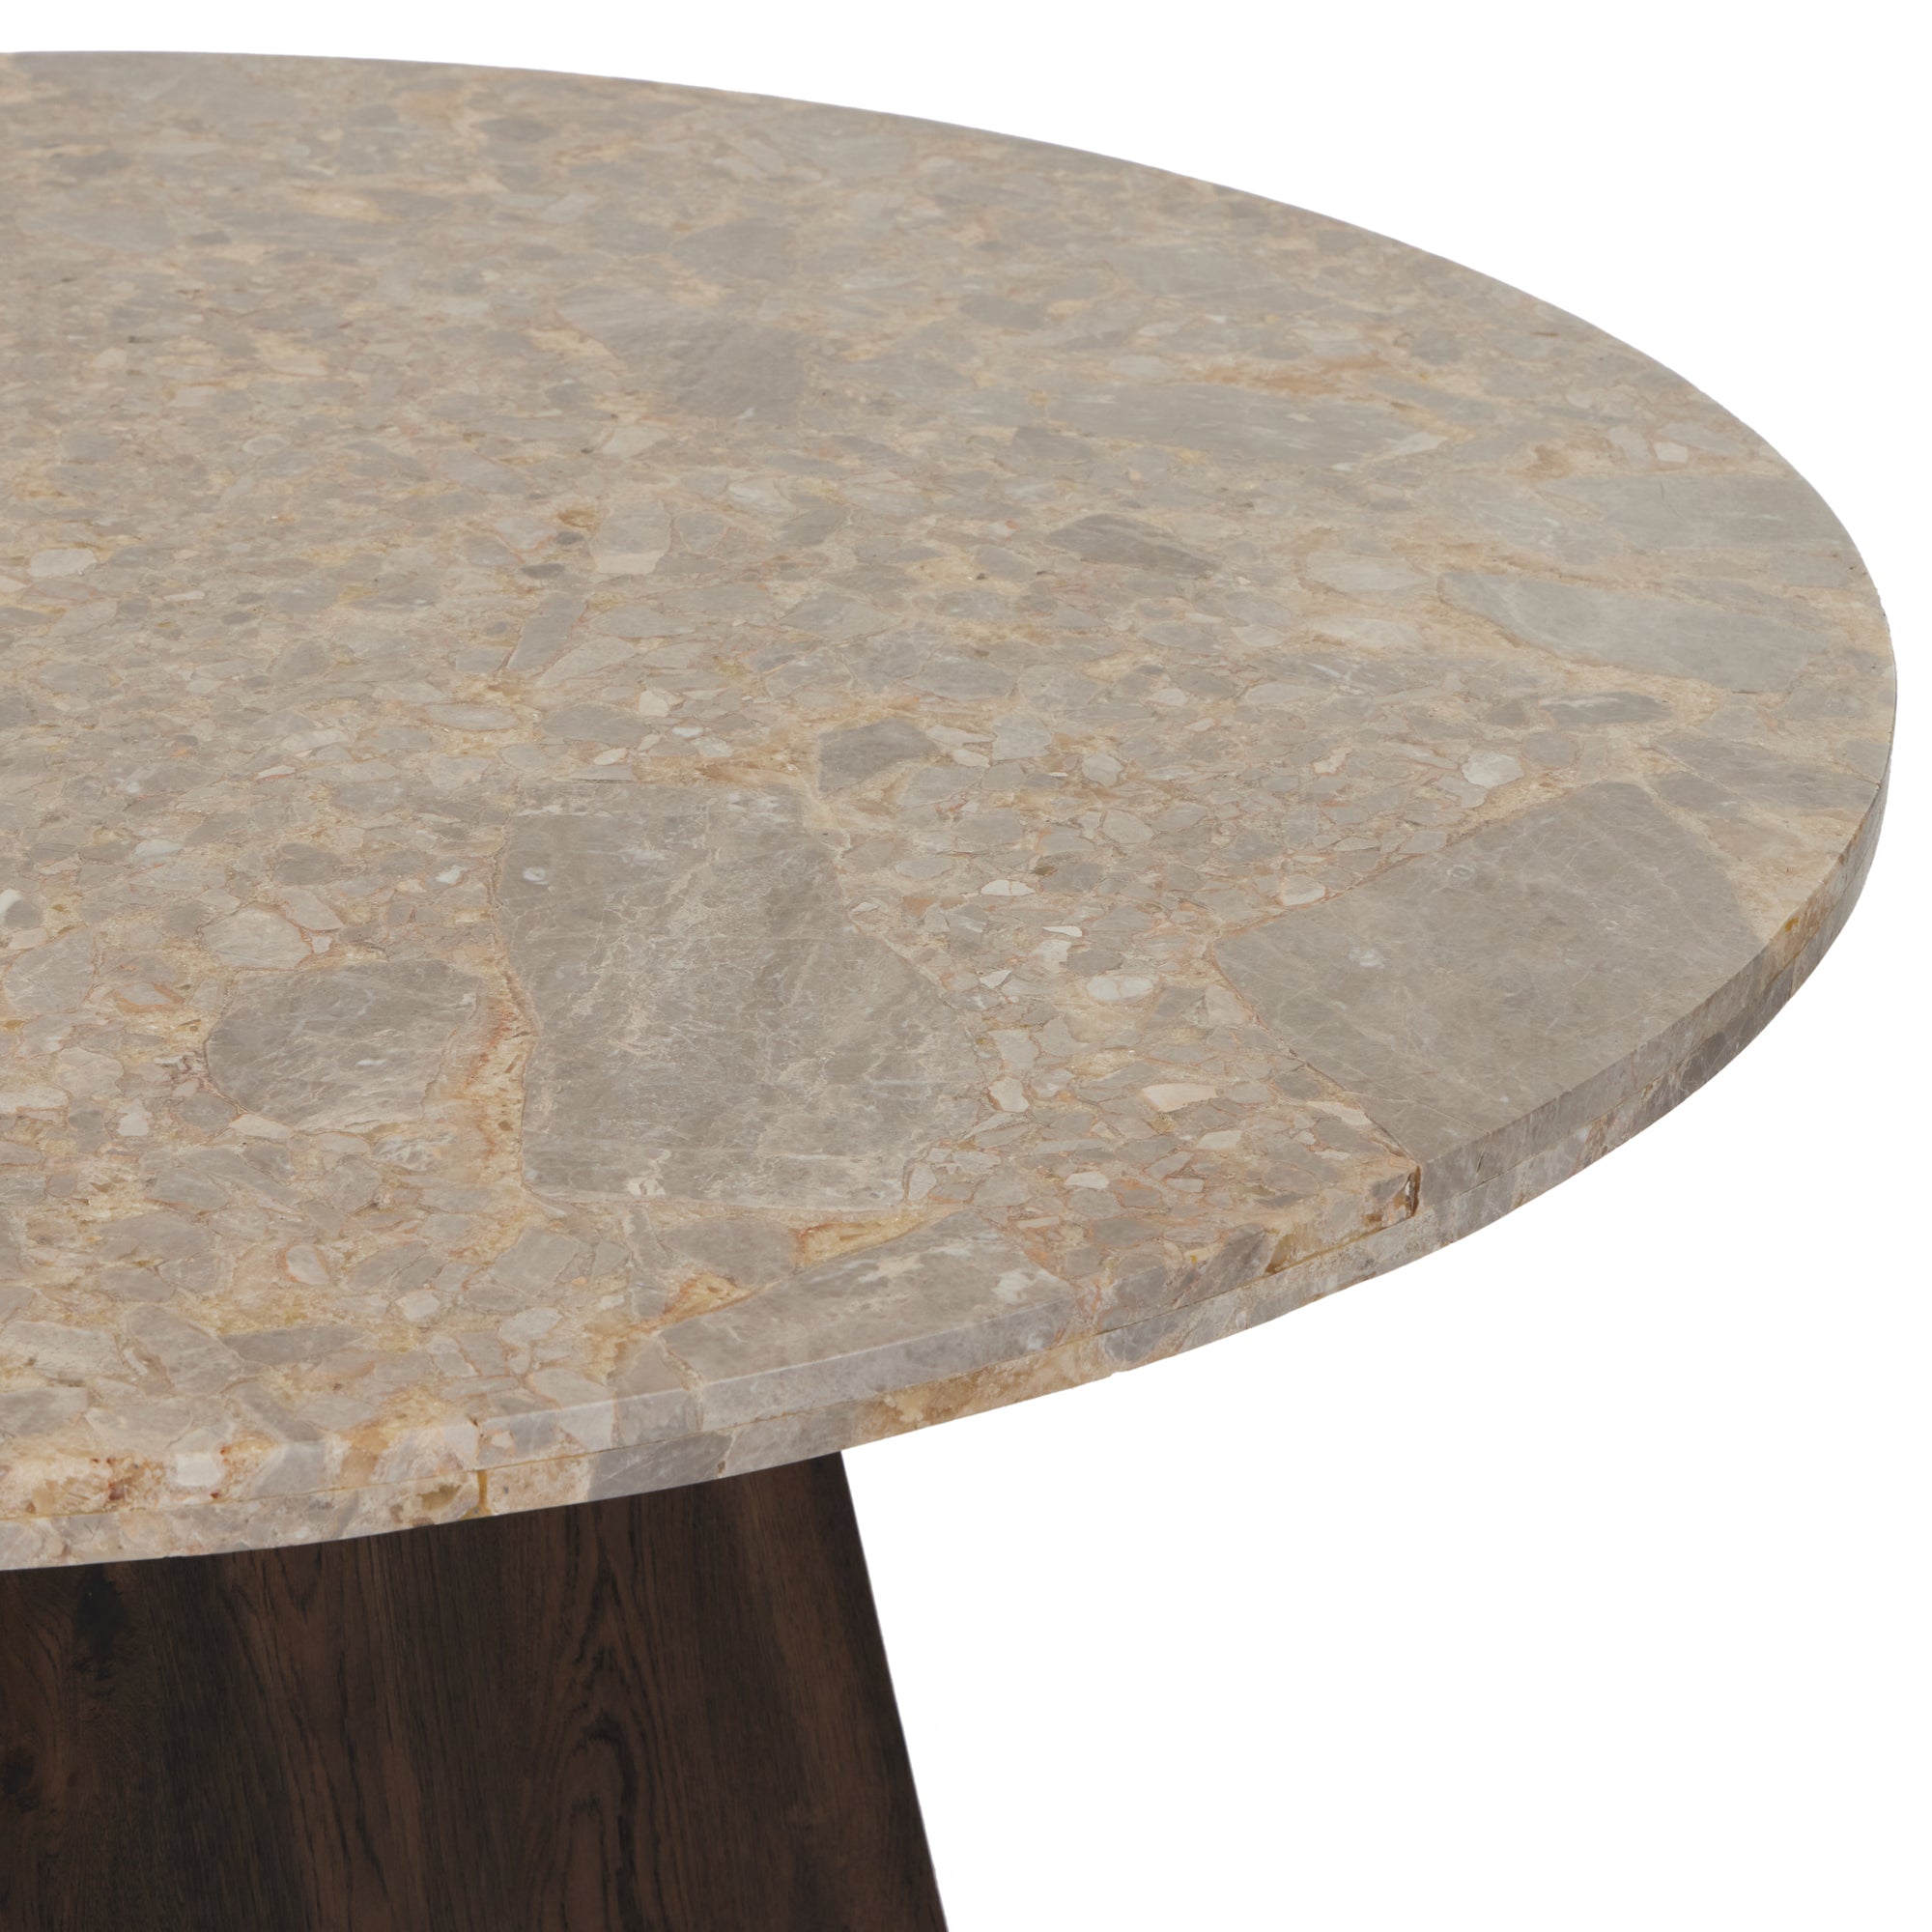 Gemma Stone Top Dining Table